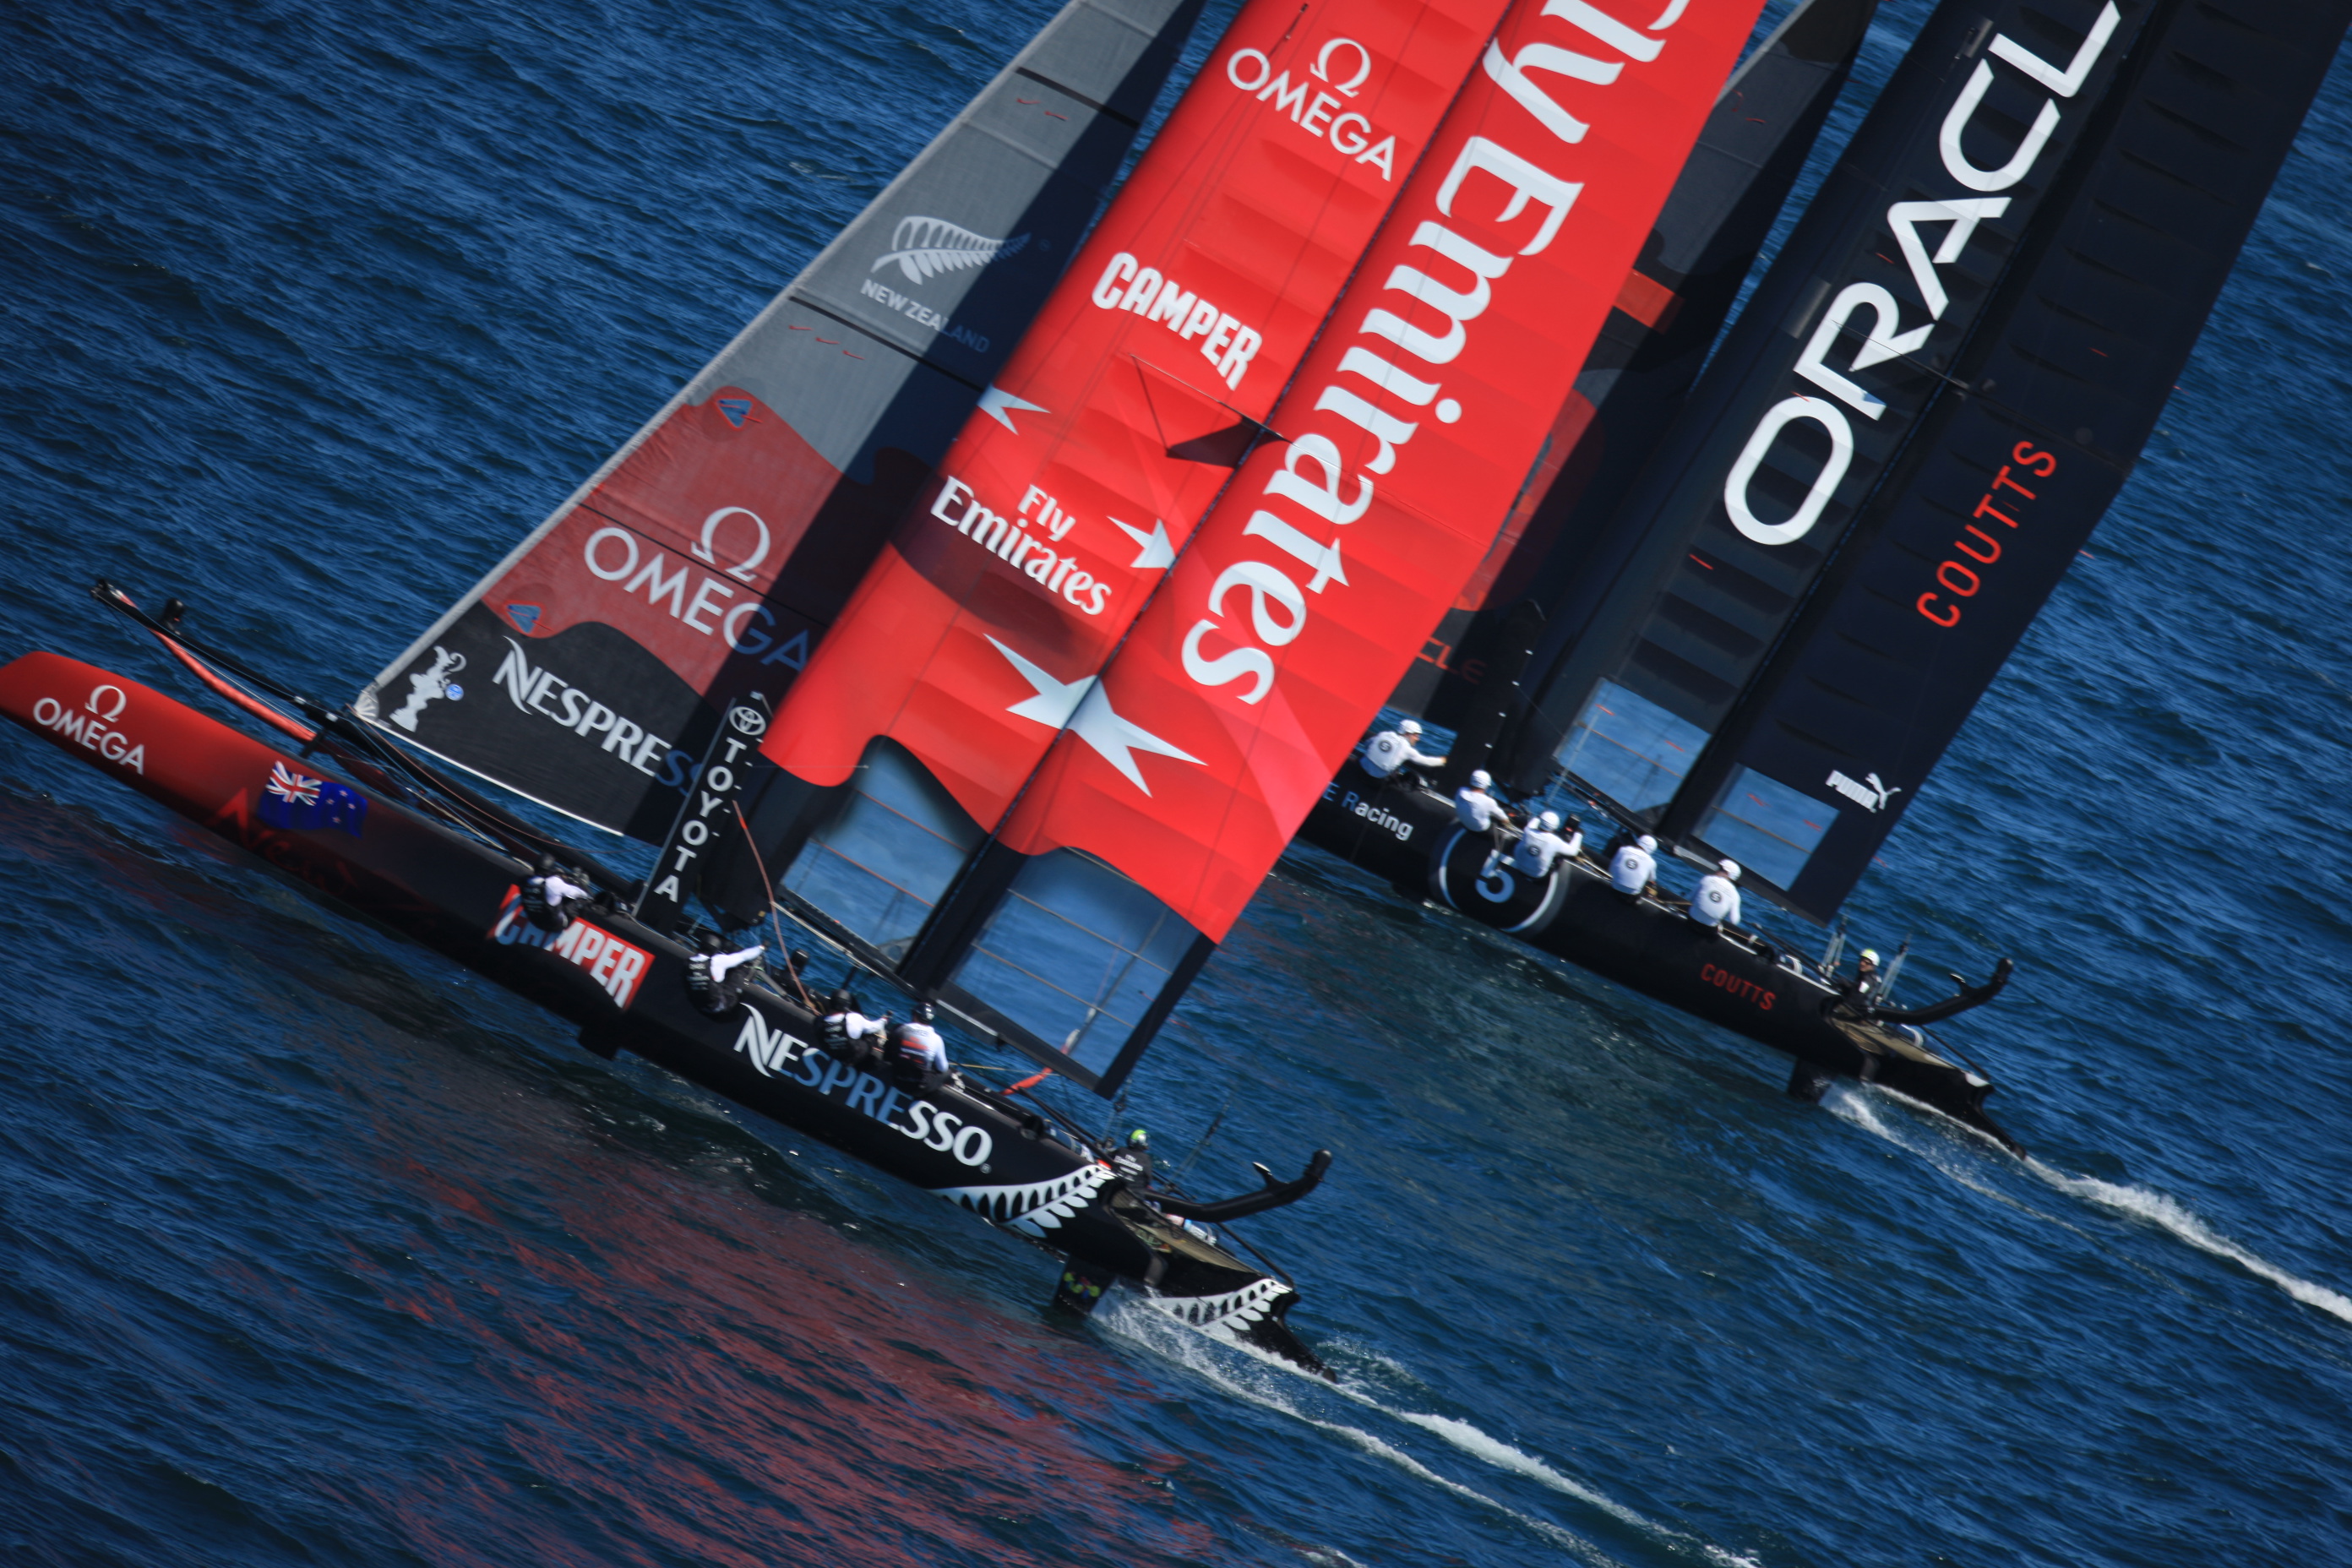 America's Cup Yachts, Sailing Auckland